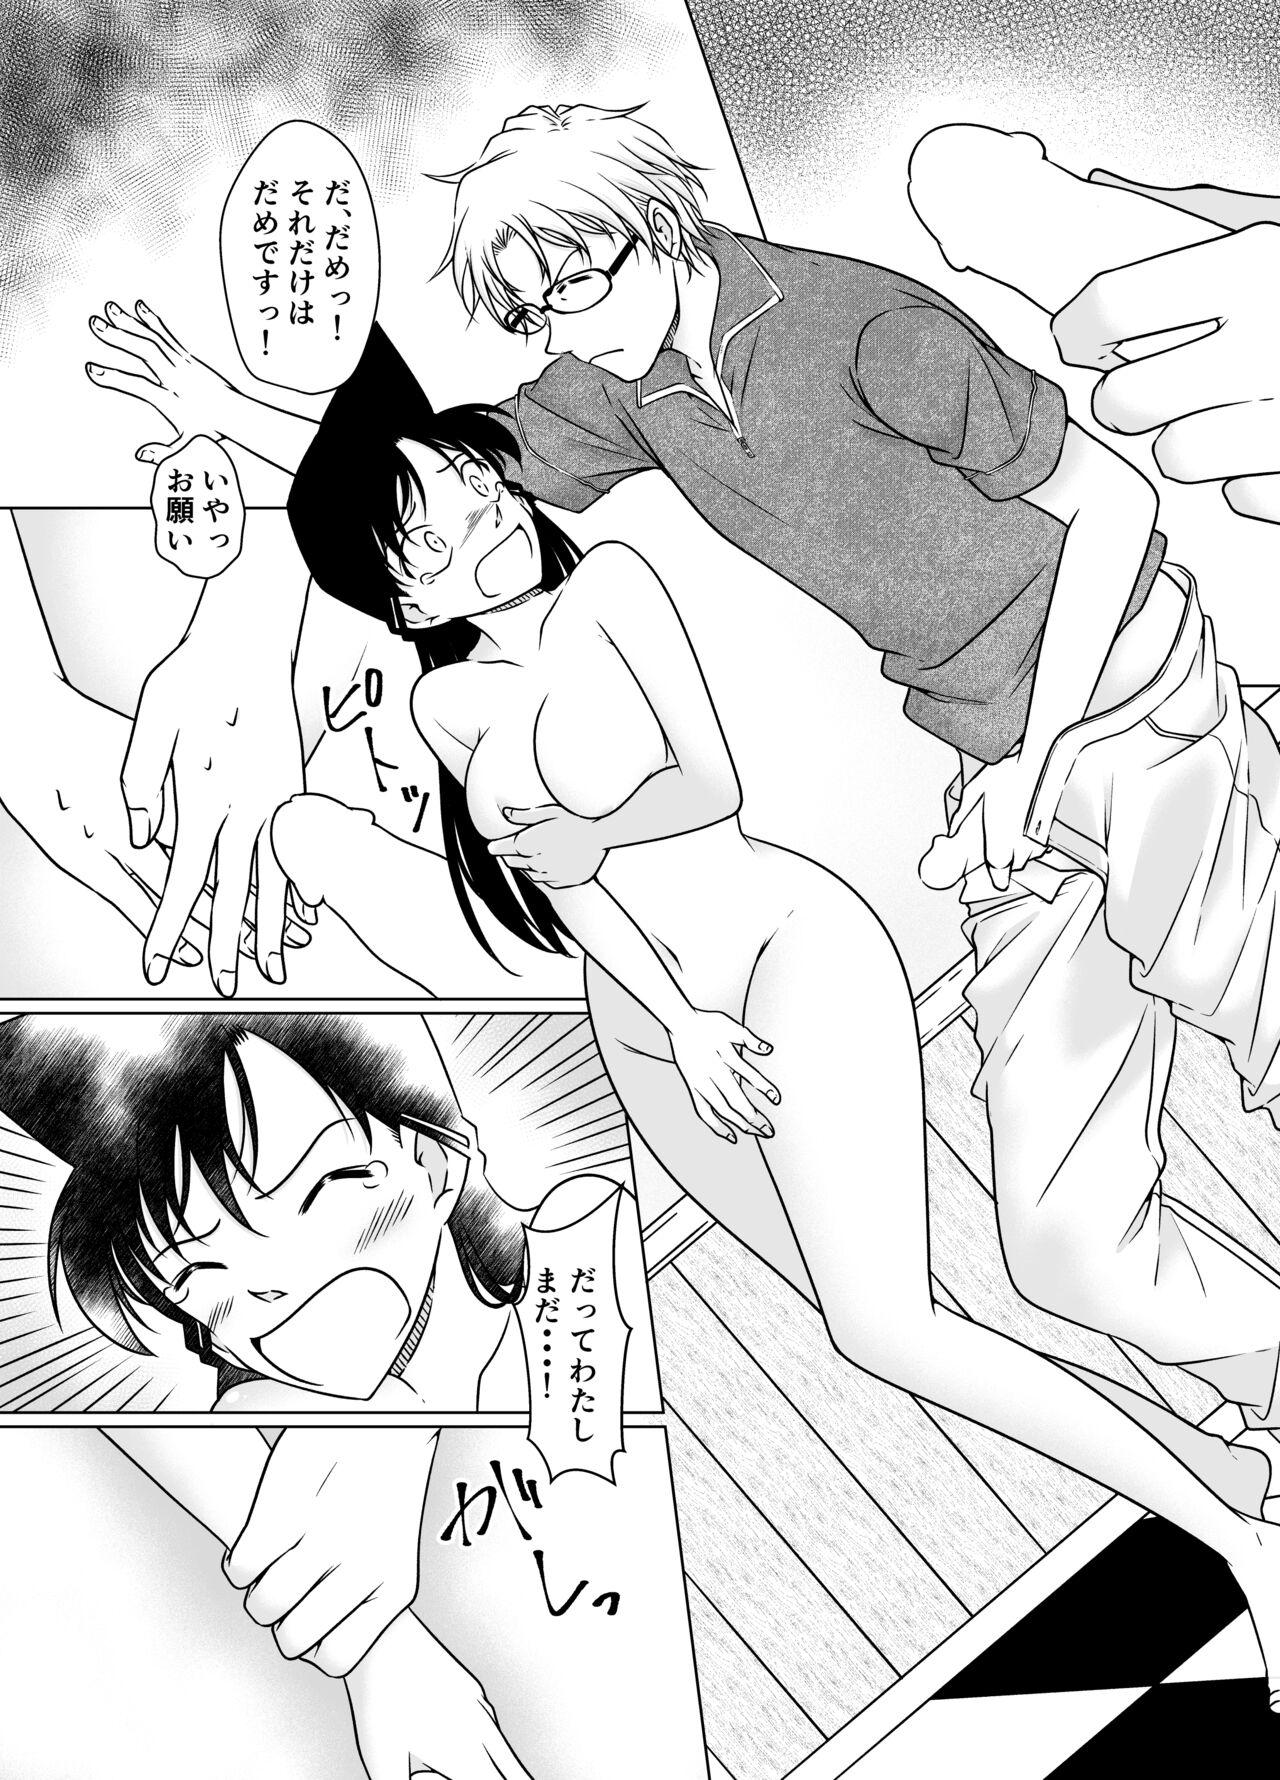 【Detective Conan】Something is wrong in the afternoon 16